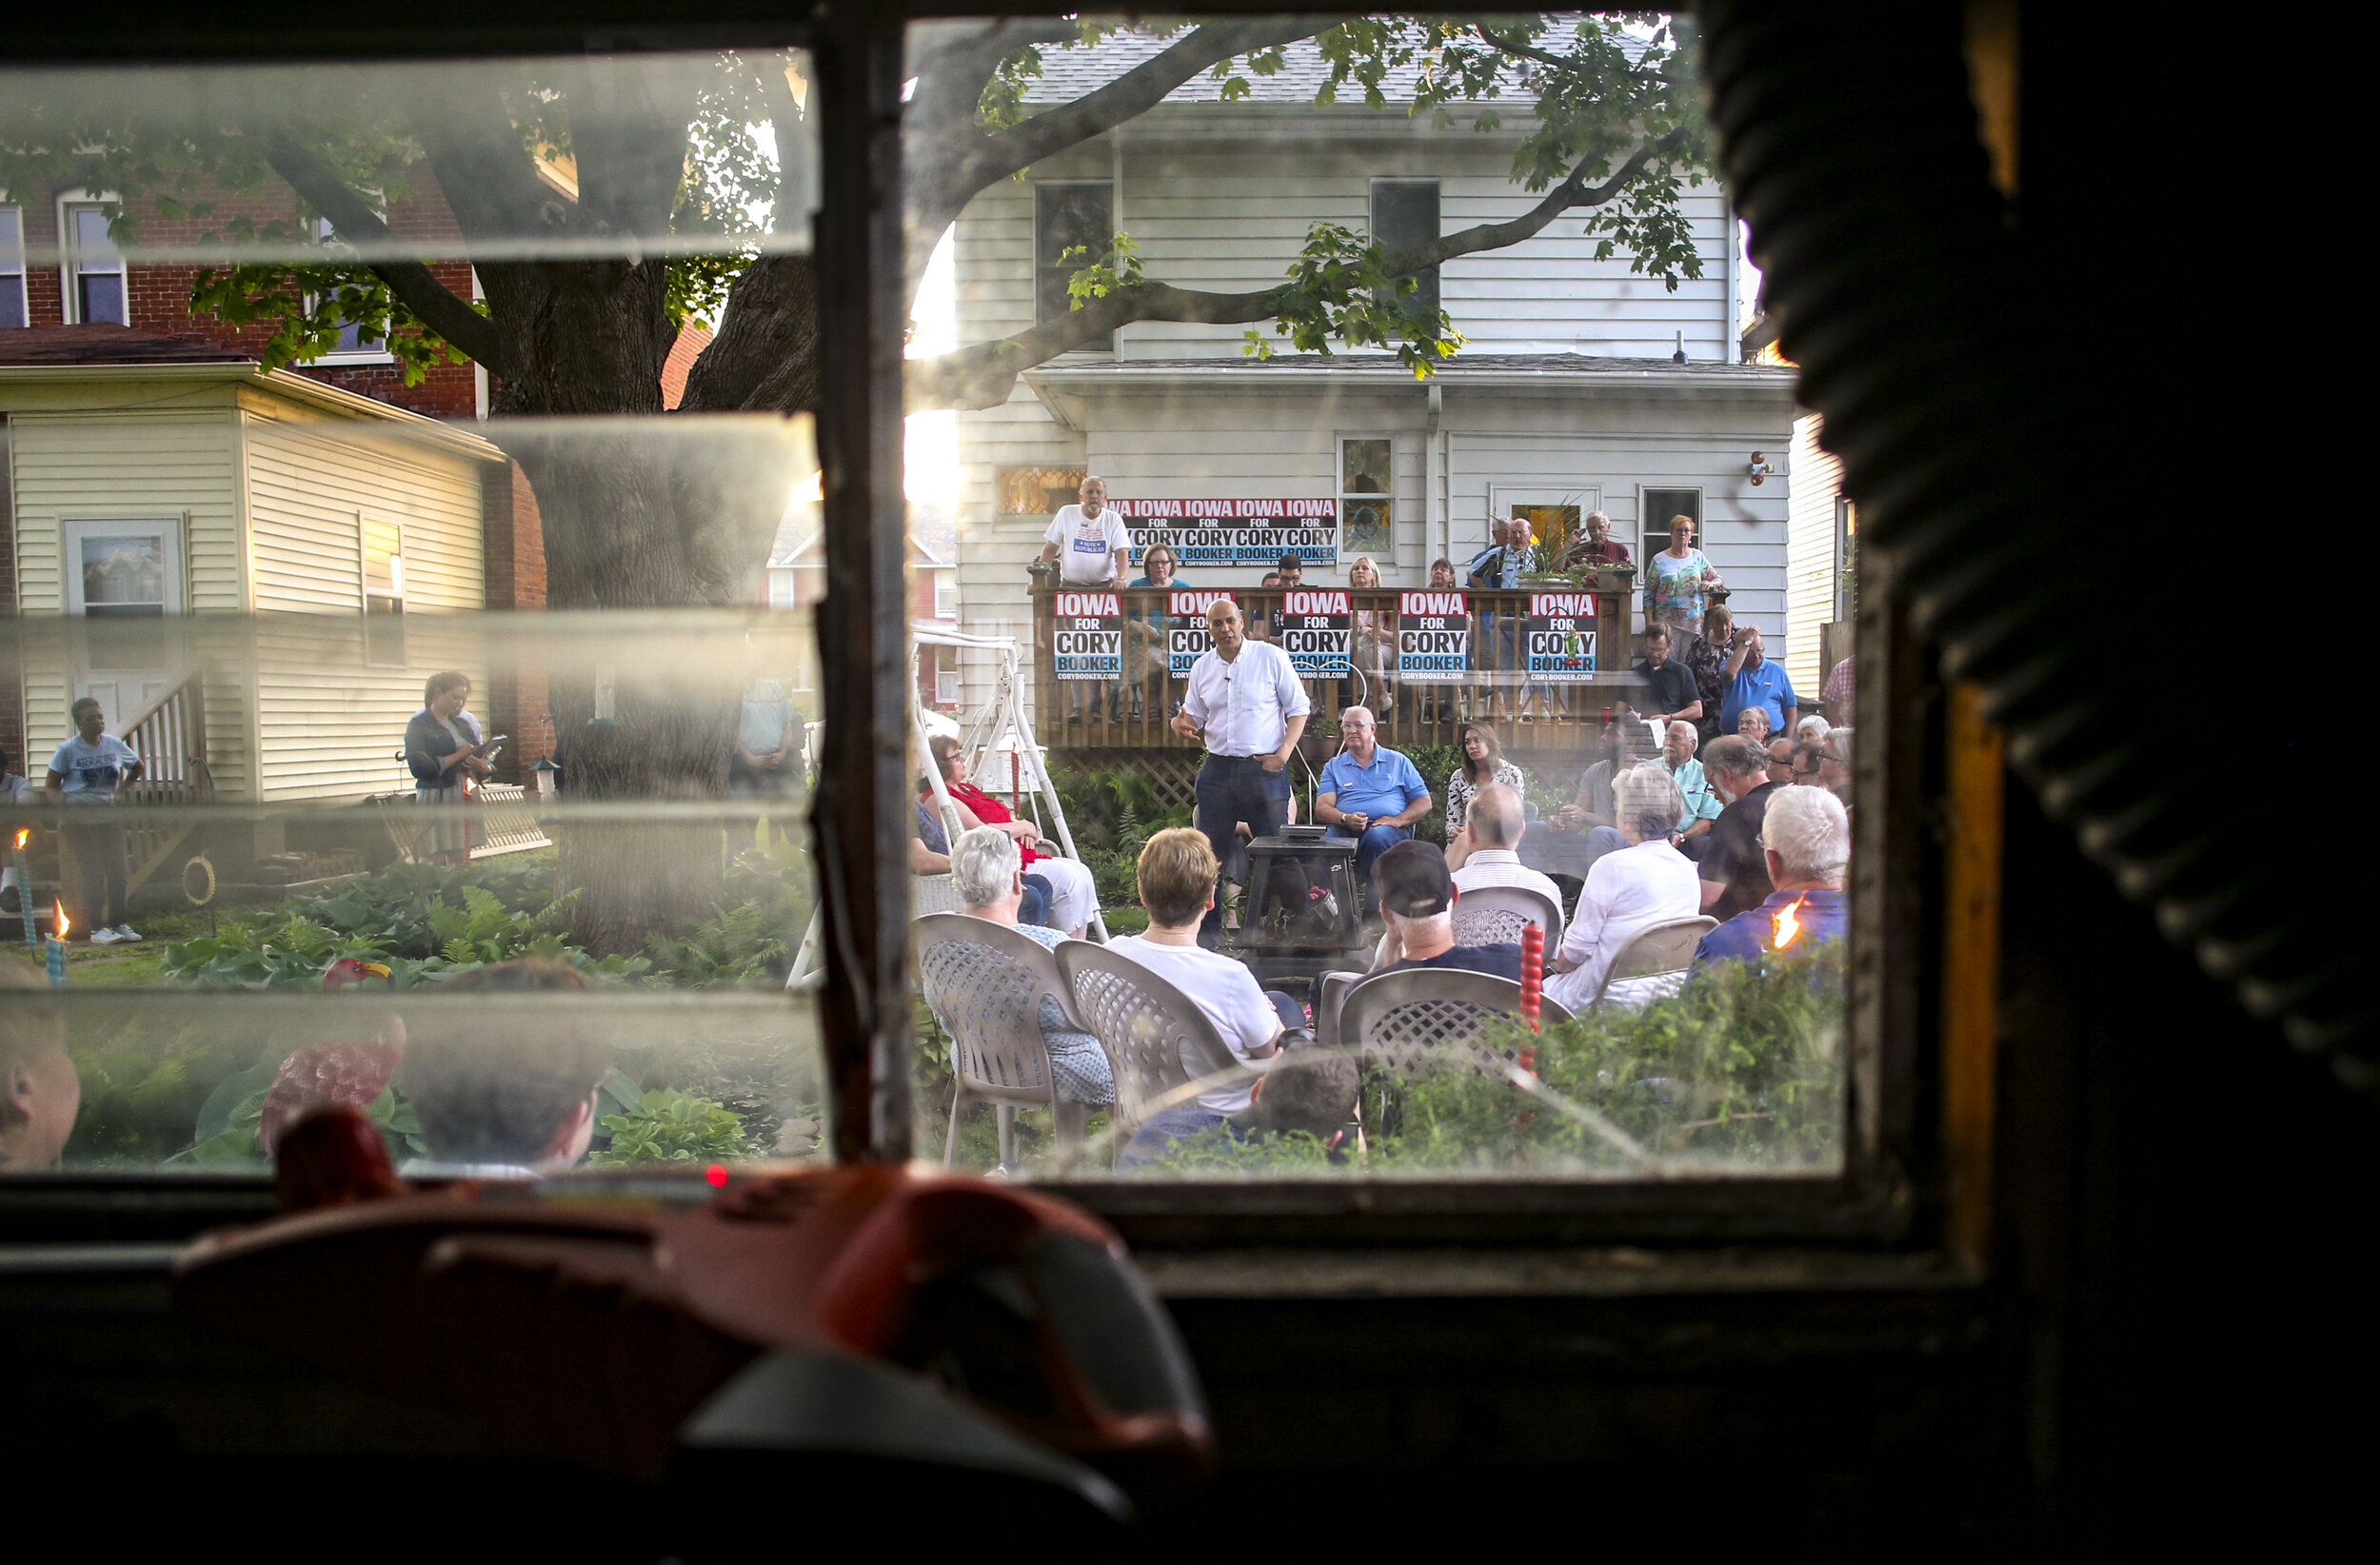  Seen from a detached garage, presidential hopeful Cory Booker speaks to gathered democrats at a backyard party in Muscatine, Iowa, Saturday.  